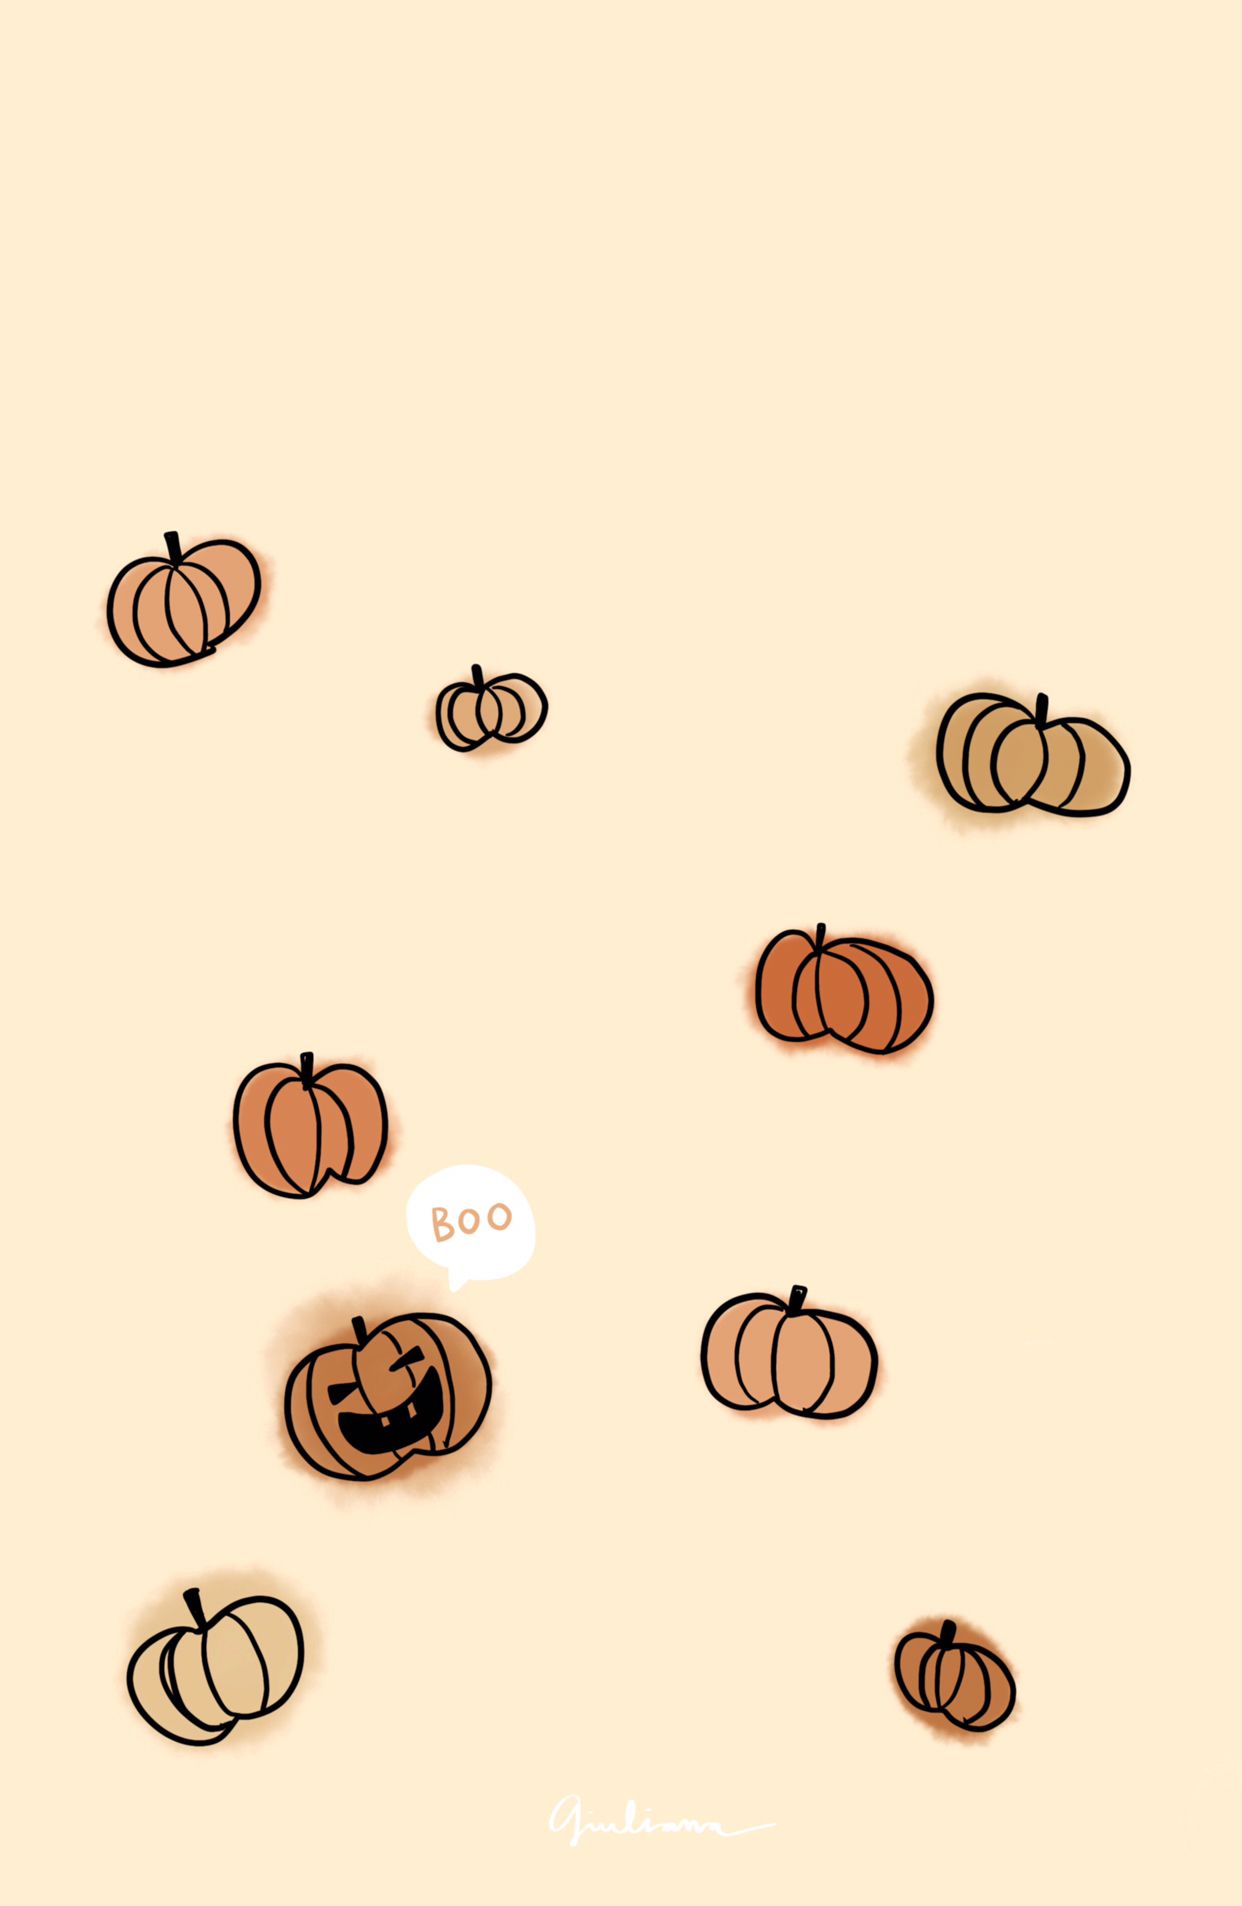 Halloween Aesthetic iPhone Backgrounds vsco cute and spooky wallpaper   LaptrinhX  News